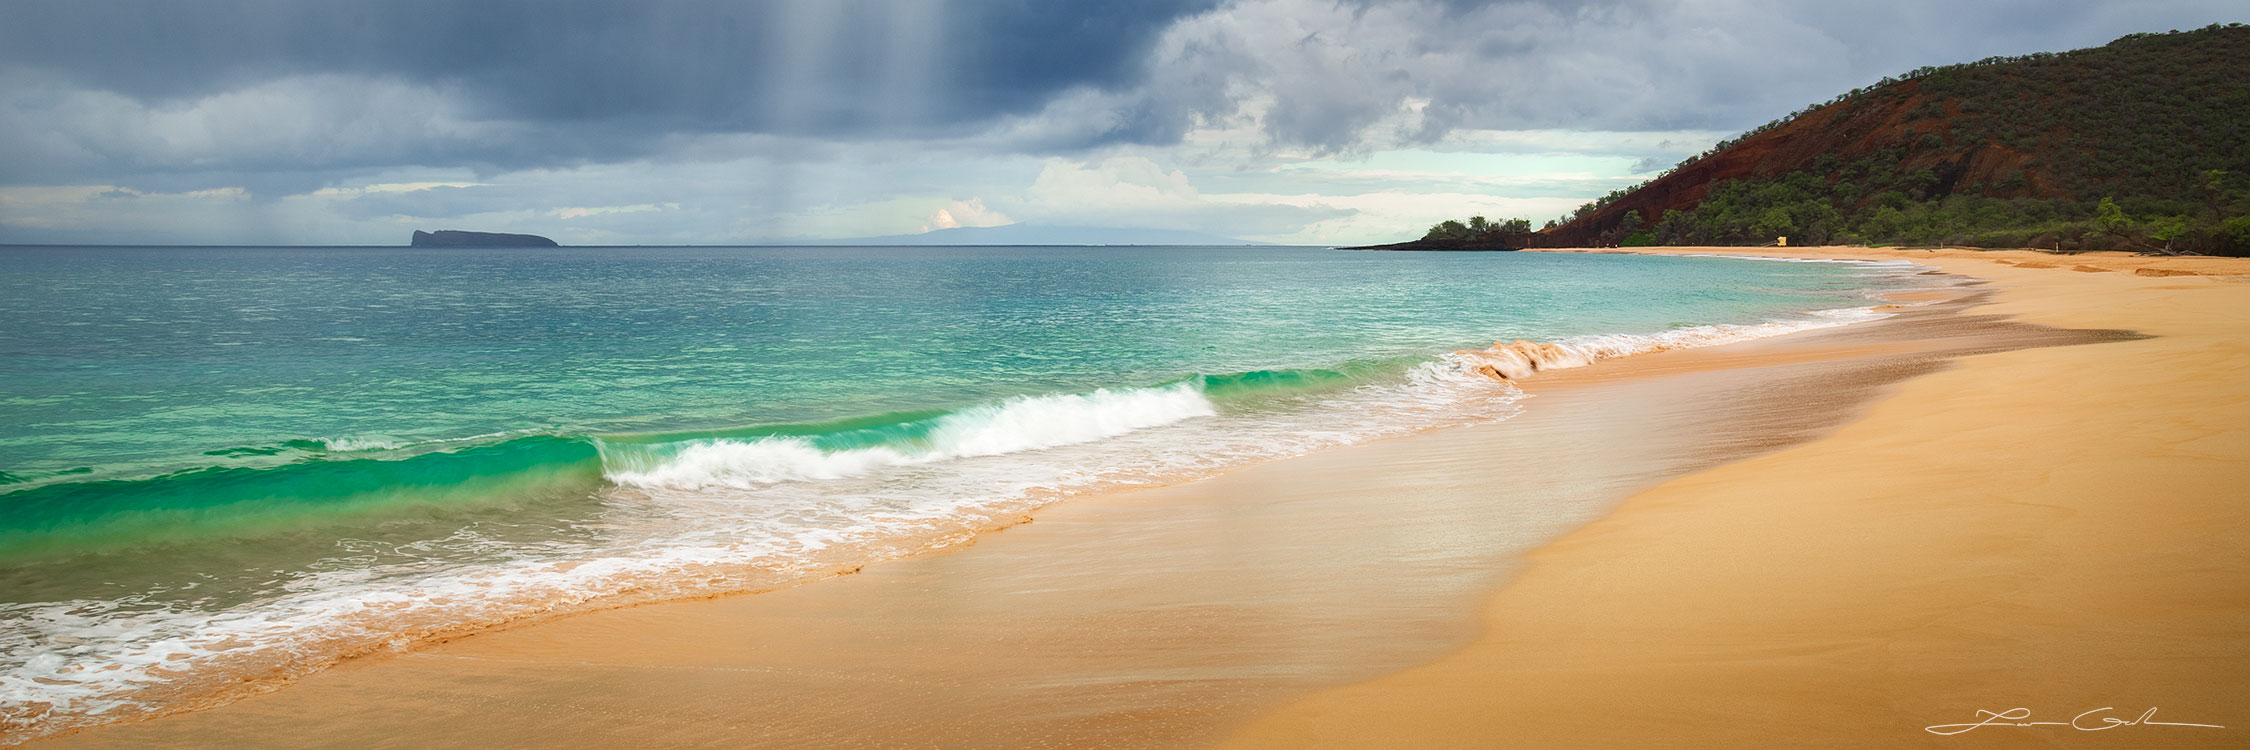 Panoramic view of an empty Maui beach with smooth golden sands, a calm turquoise ocean, a distant view of Molokini island, a hillside meeting the ocean, and a sky filled with dark clouds and falling rain in the fine art print 'Solitude Sands' - Gintchin Fine Art